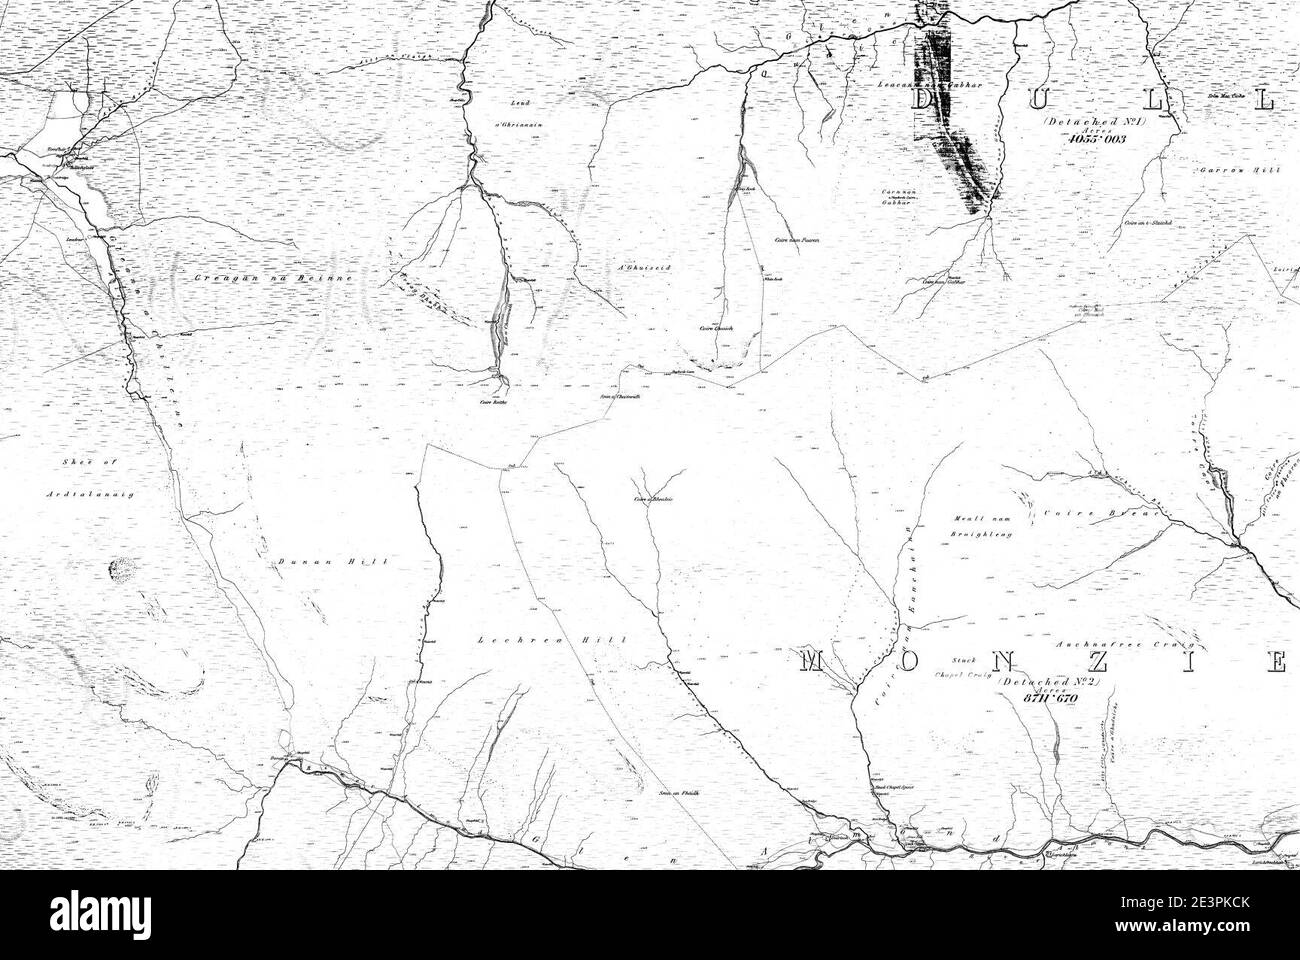 Perthshire map Black and White Stock Photos & Images - Alamy